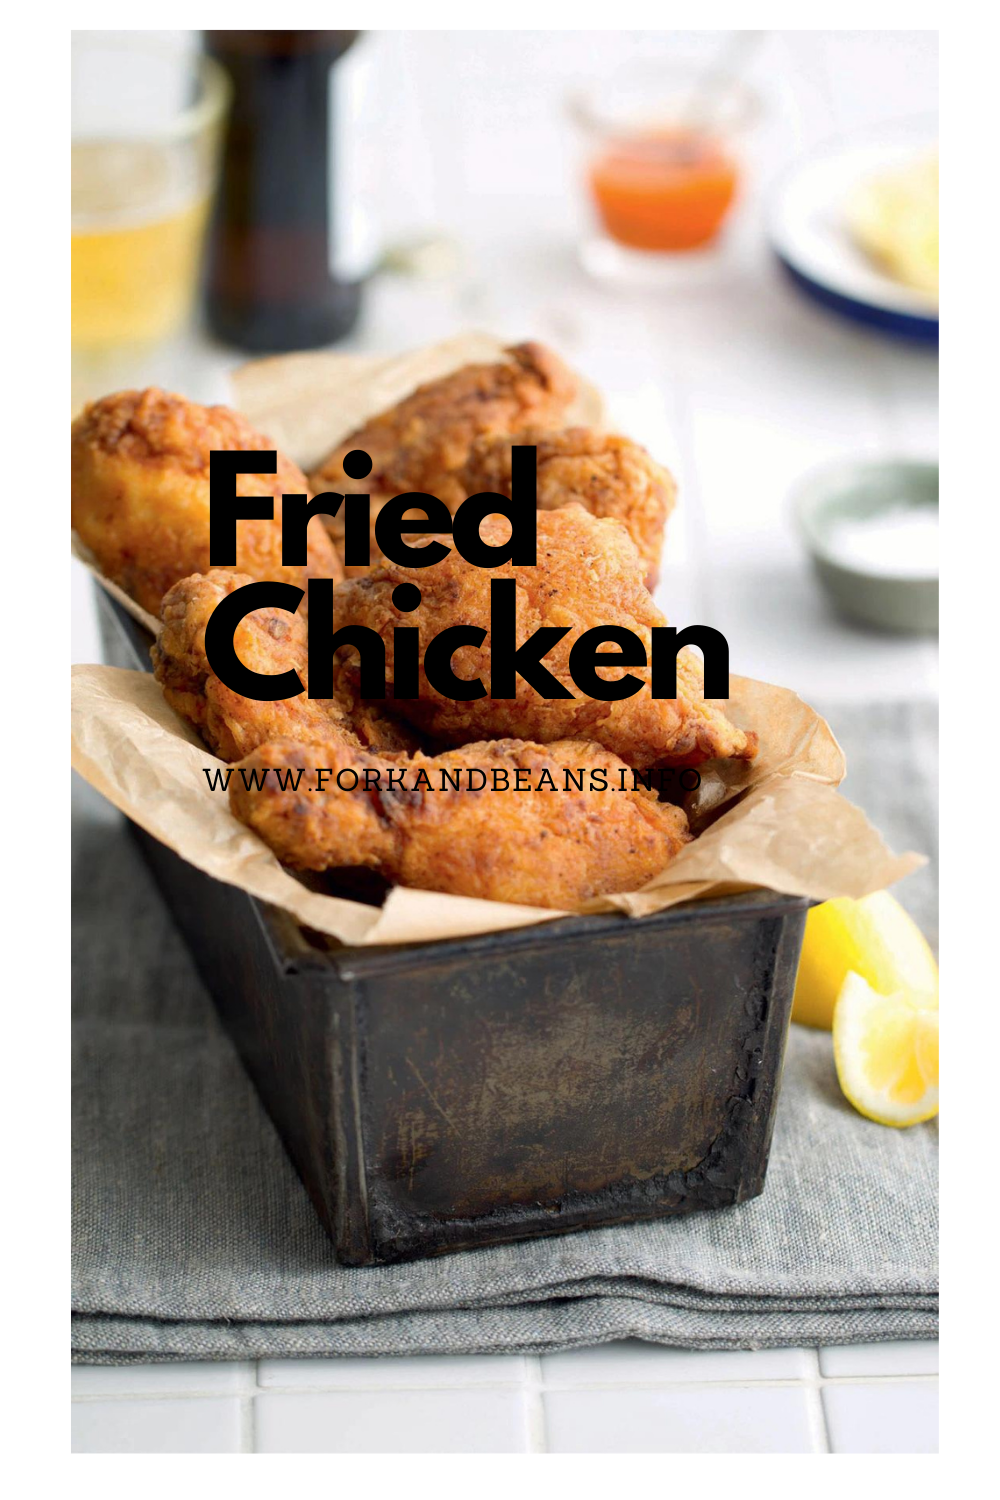 Chicken that has been fried